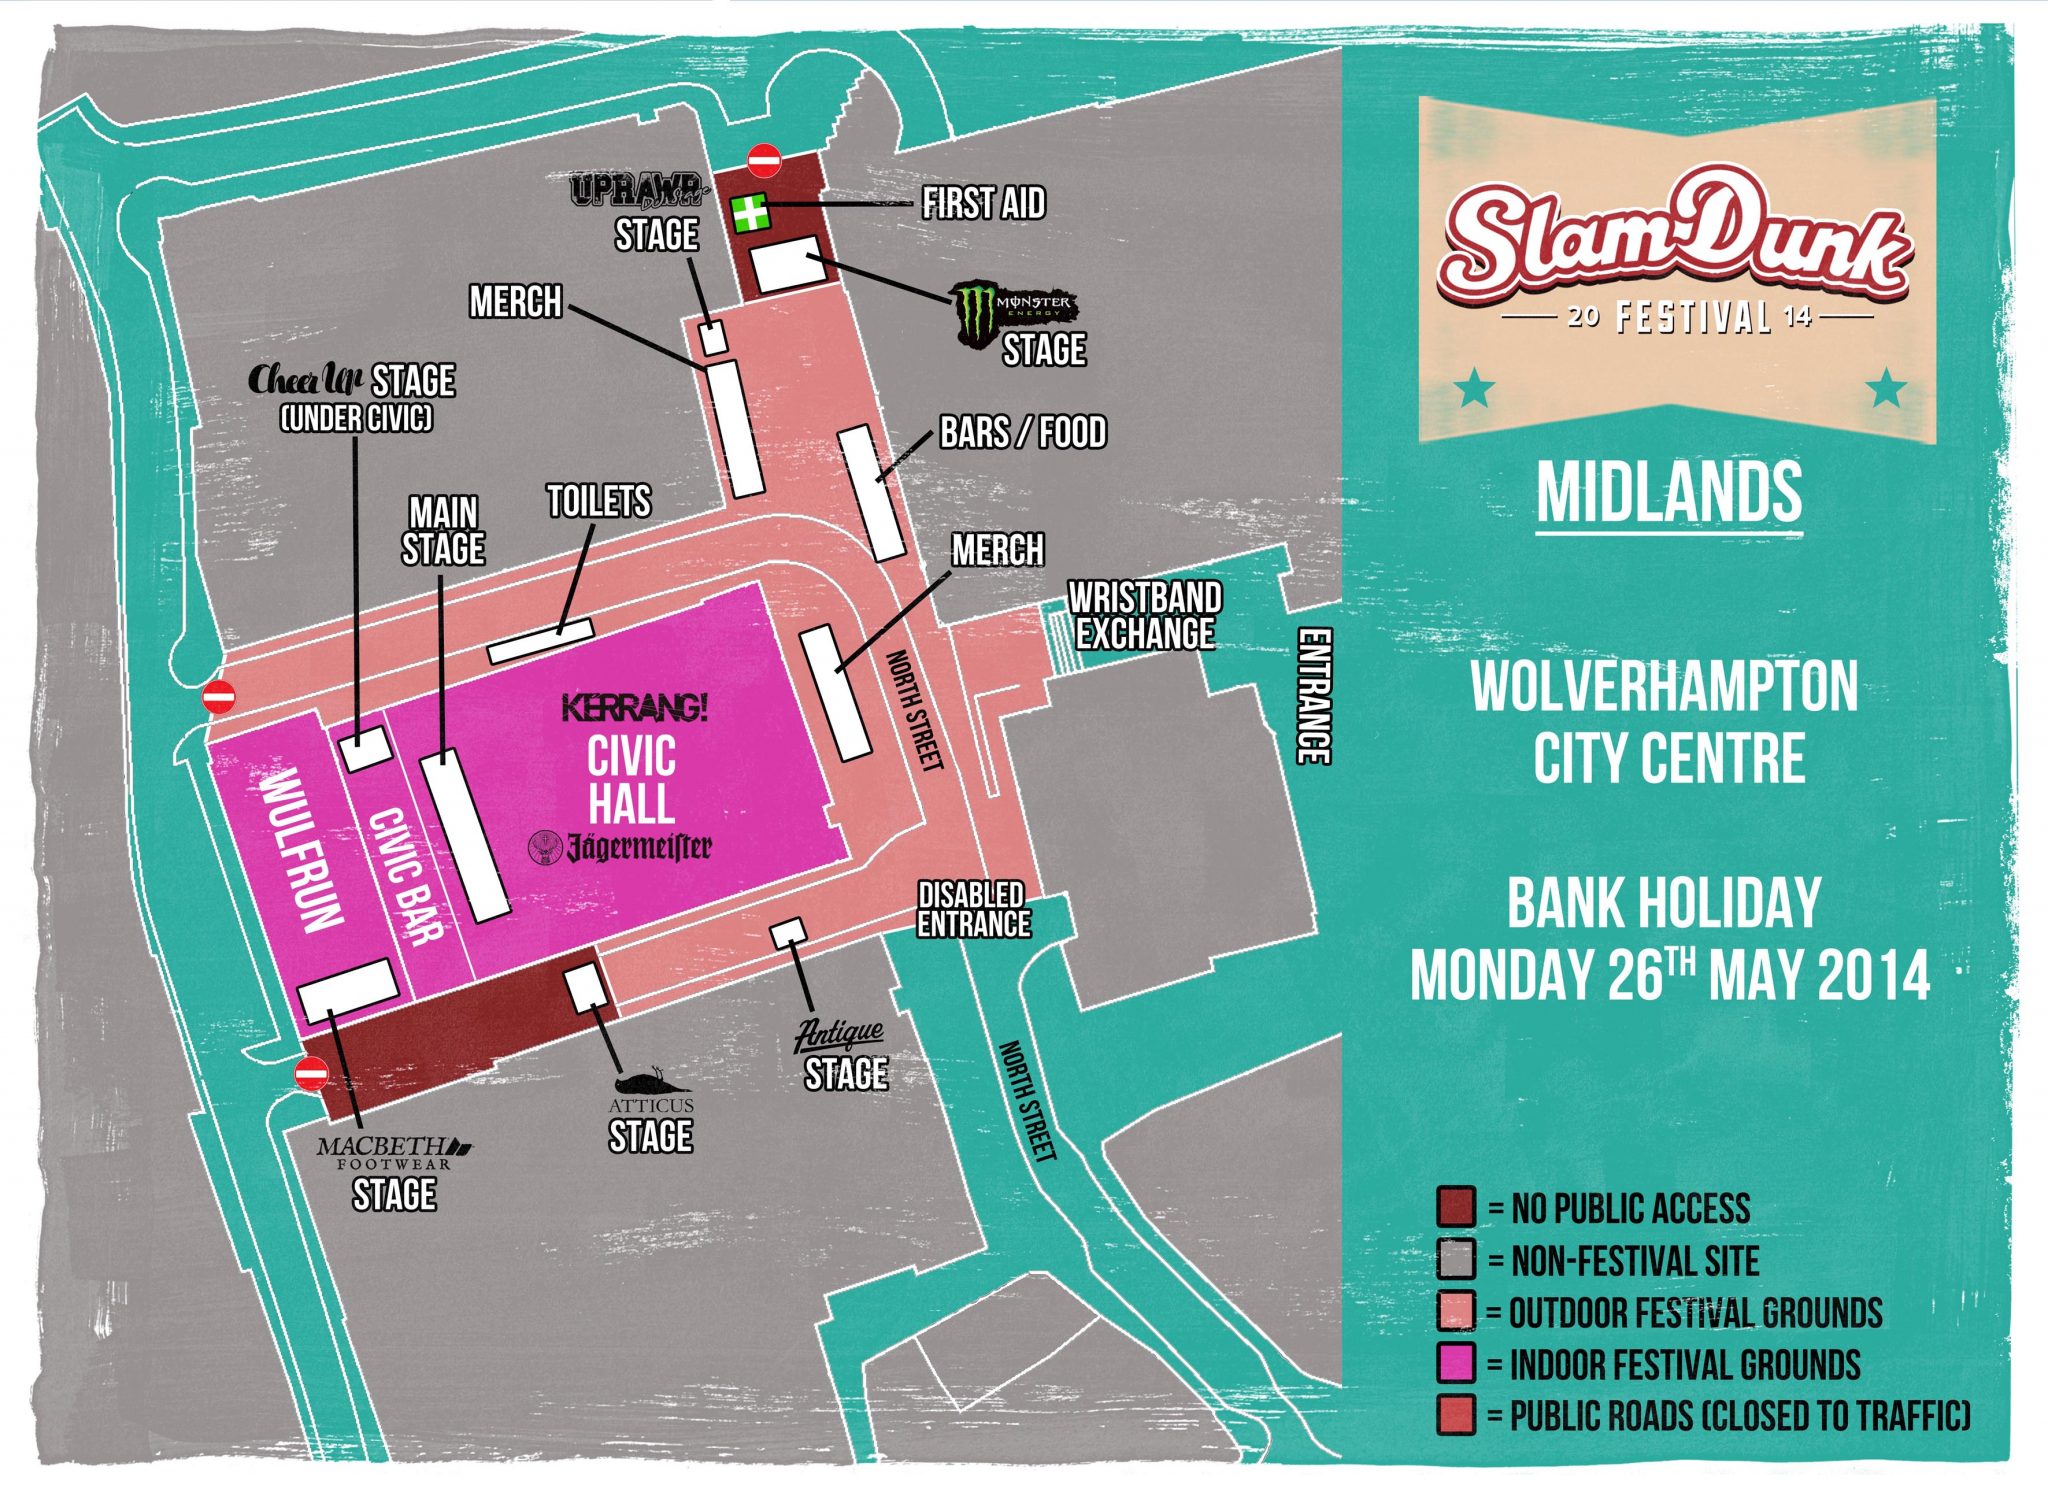 Slam Dunk Festival Stage Layouts - The Pop Punk Days